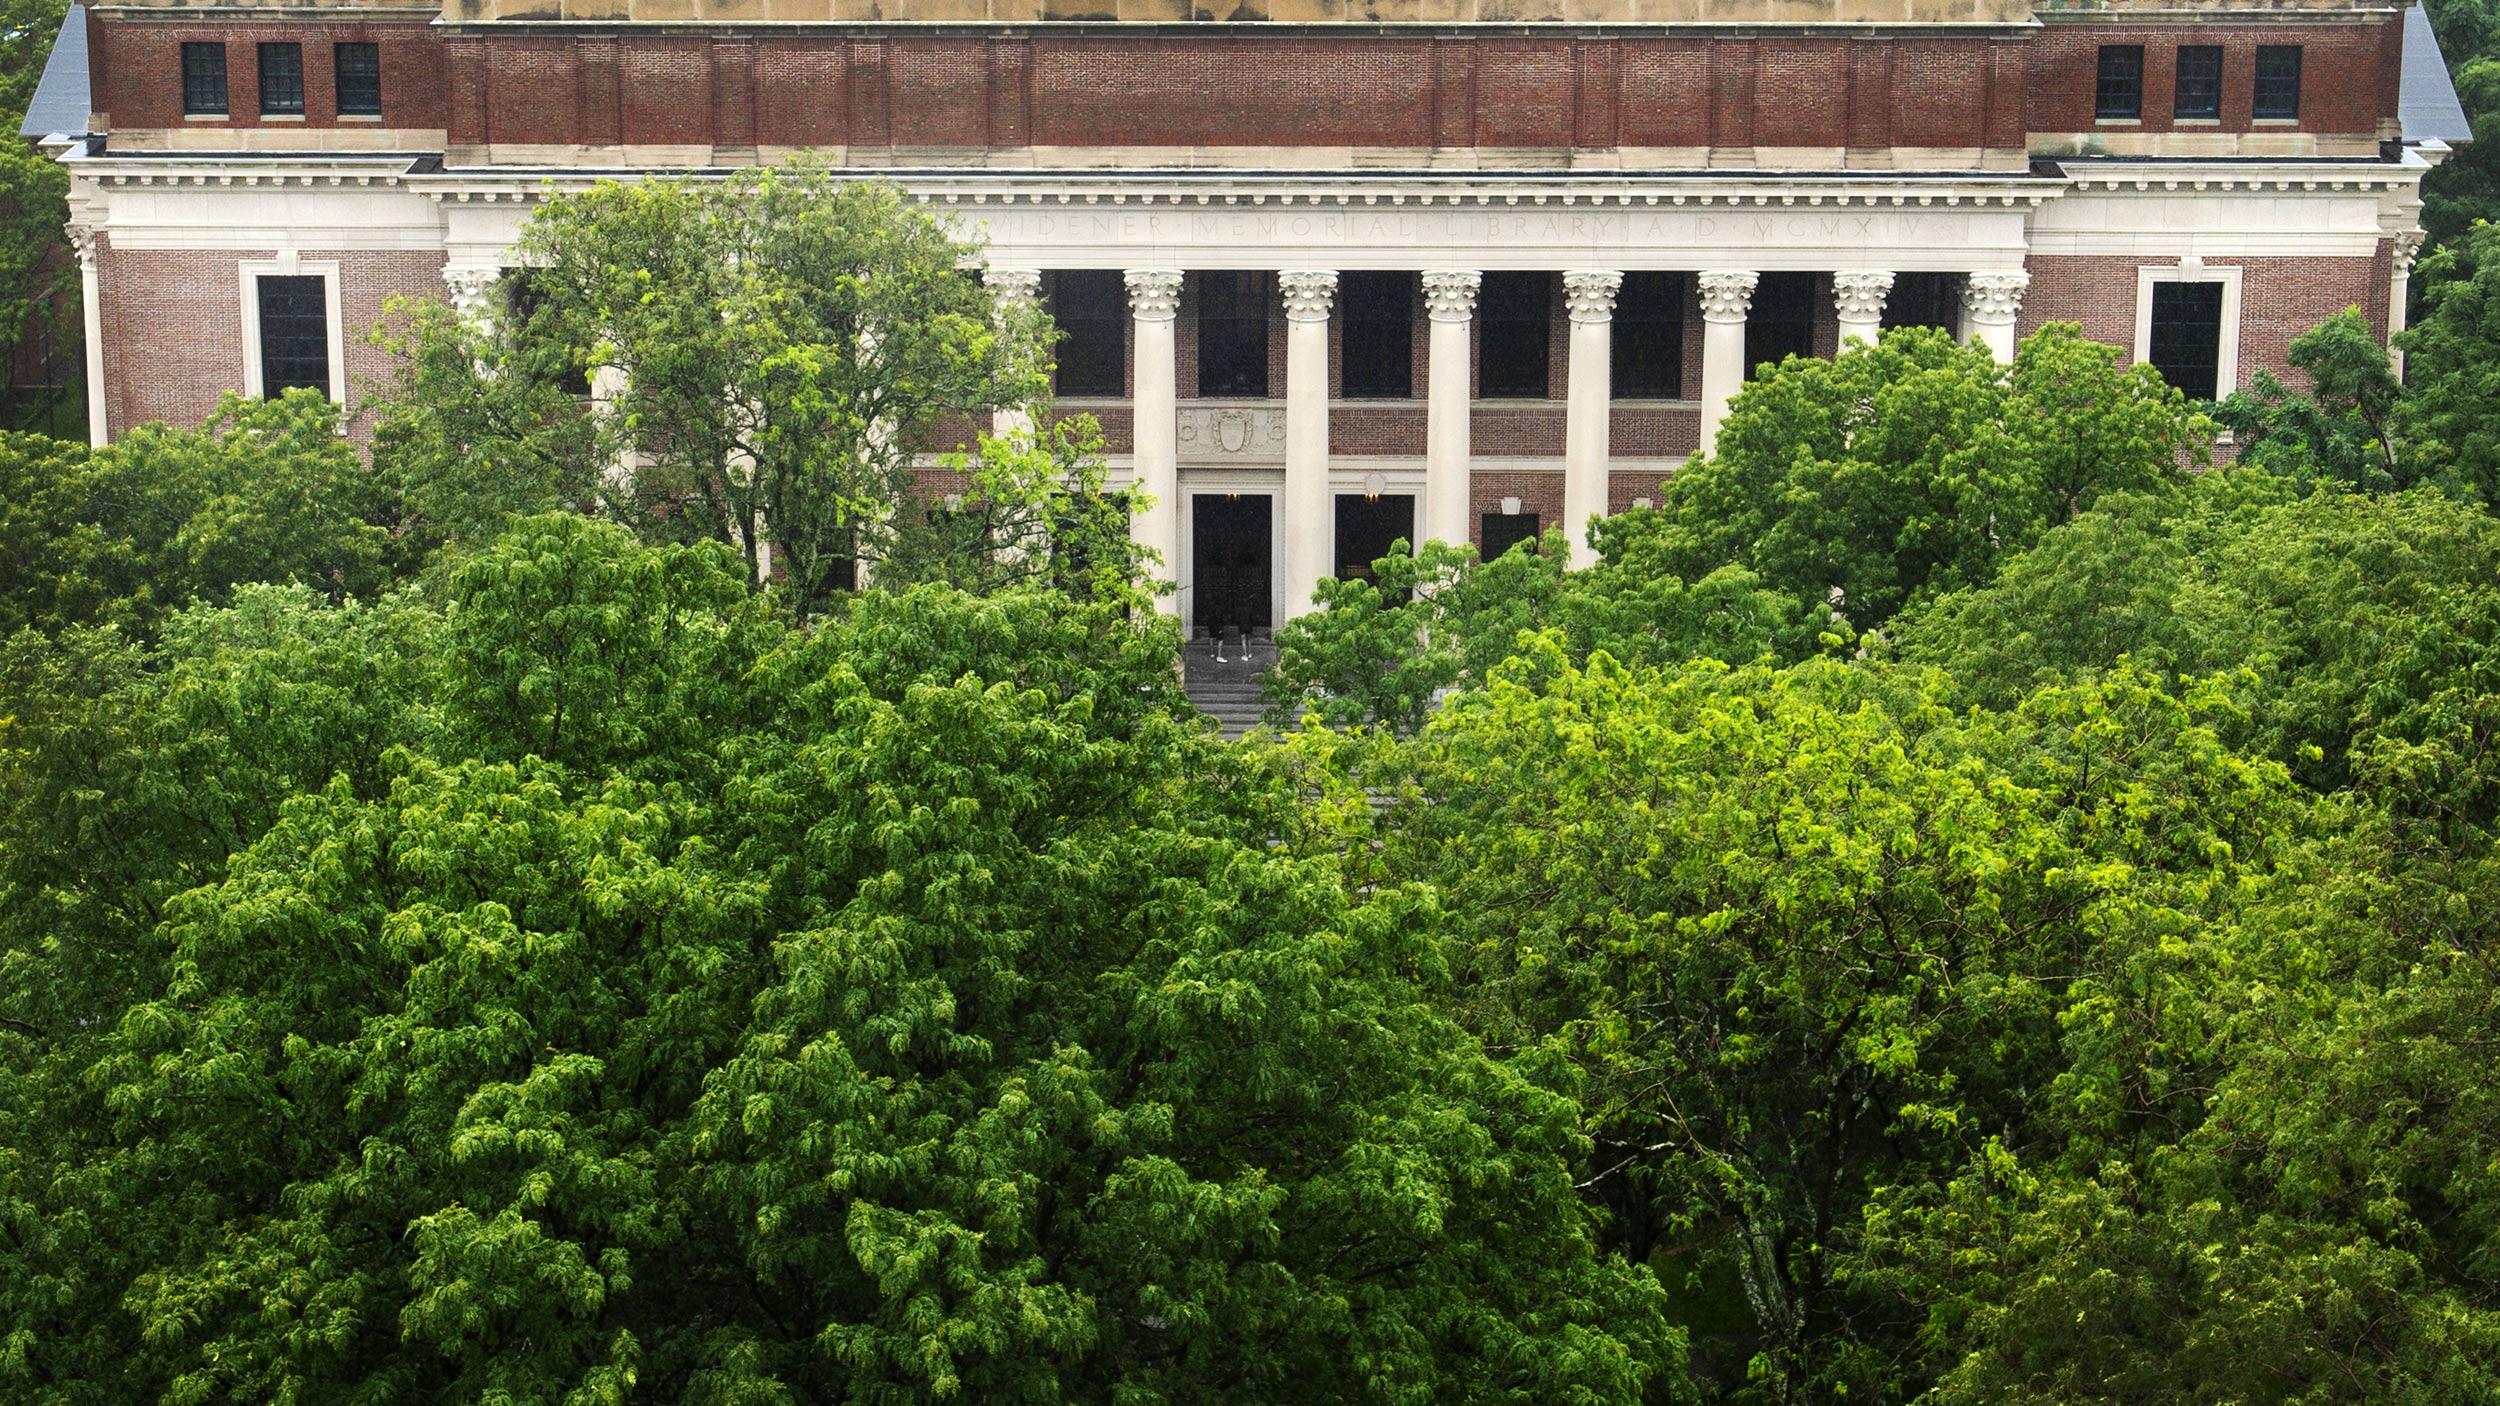 Trees engulf the steps and entrance to Widener Library.